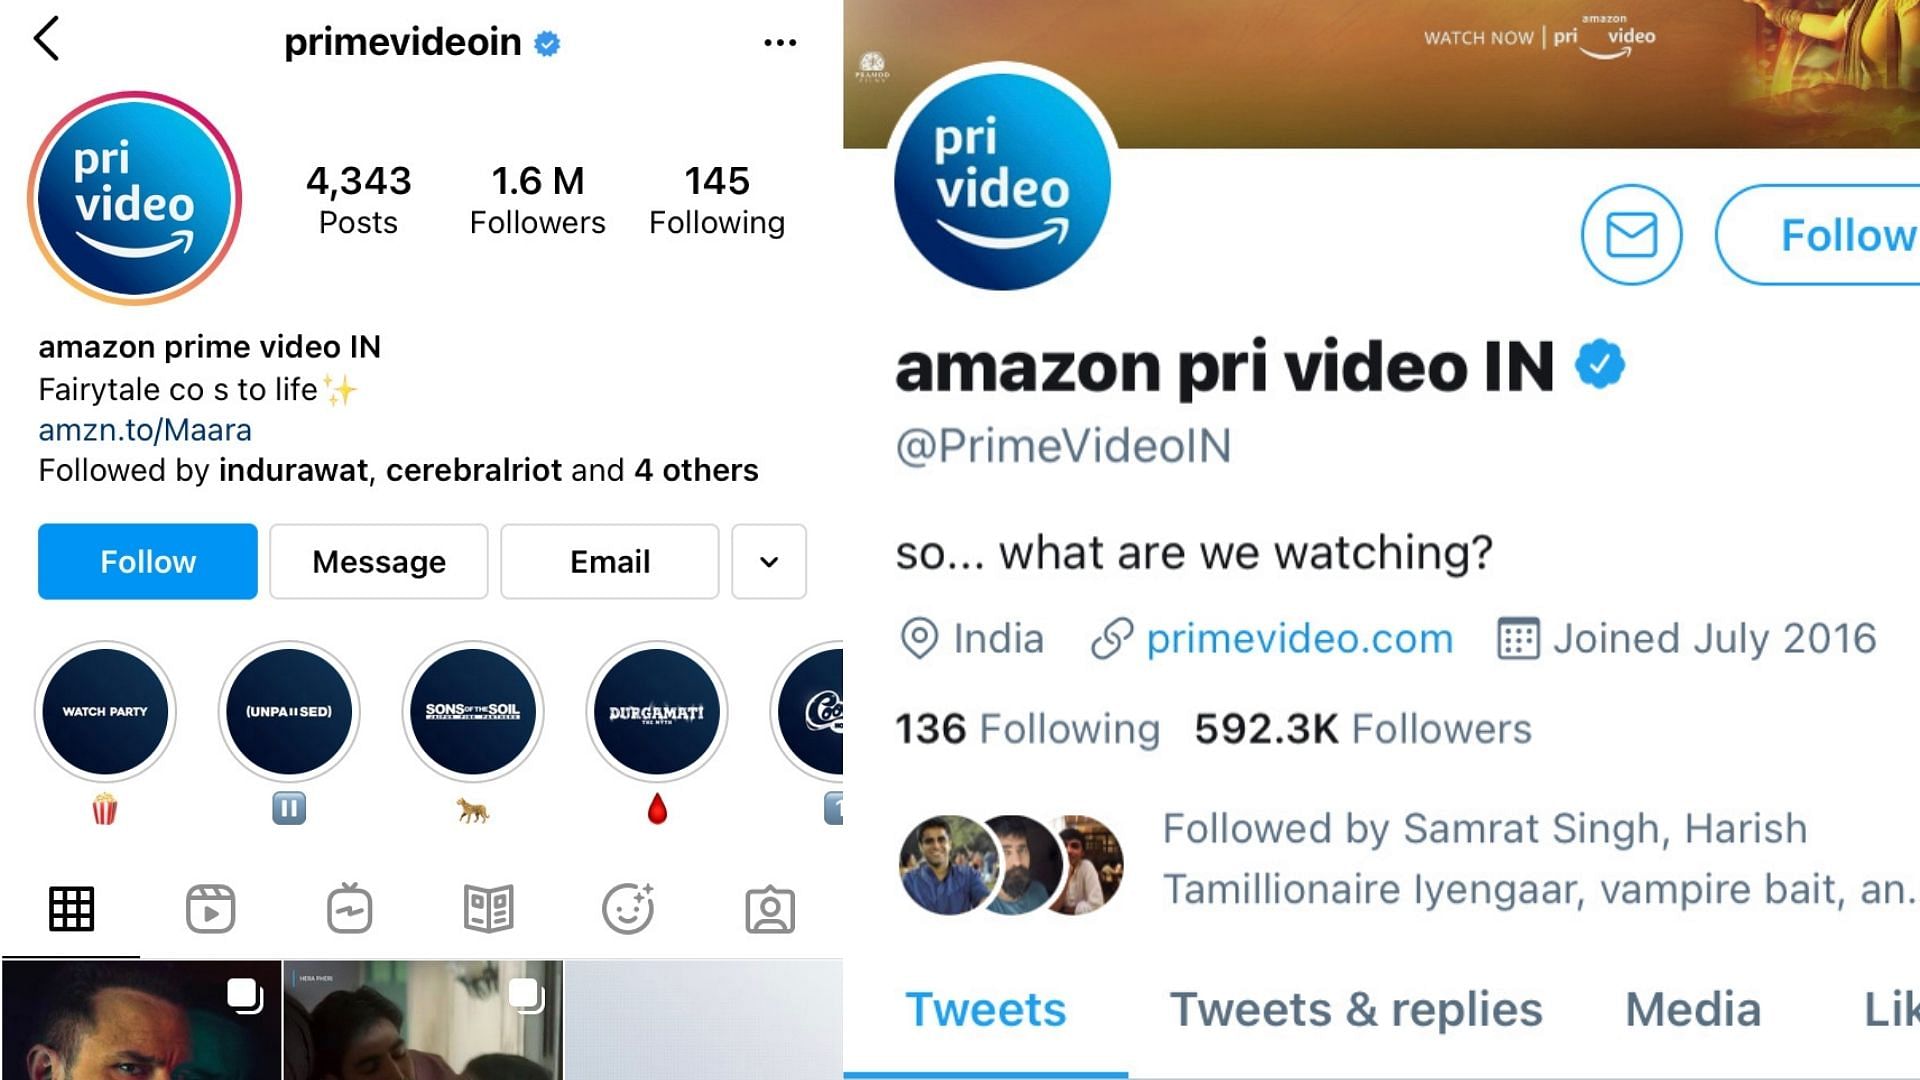 Where Did ‘ME’ From The Amazon Prime Video Logo Vanish?